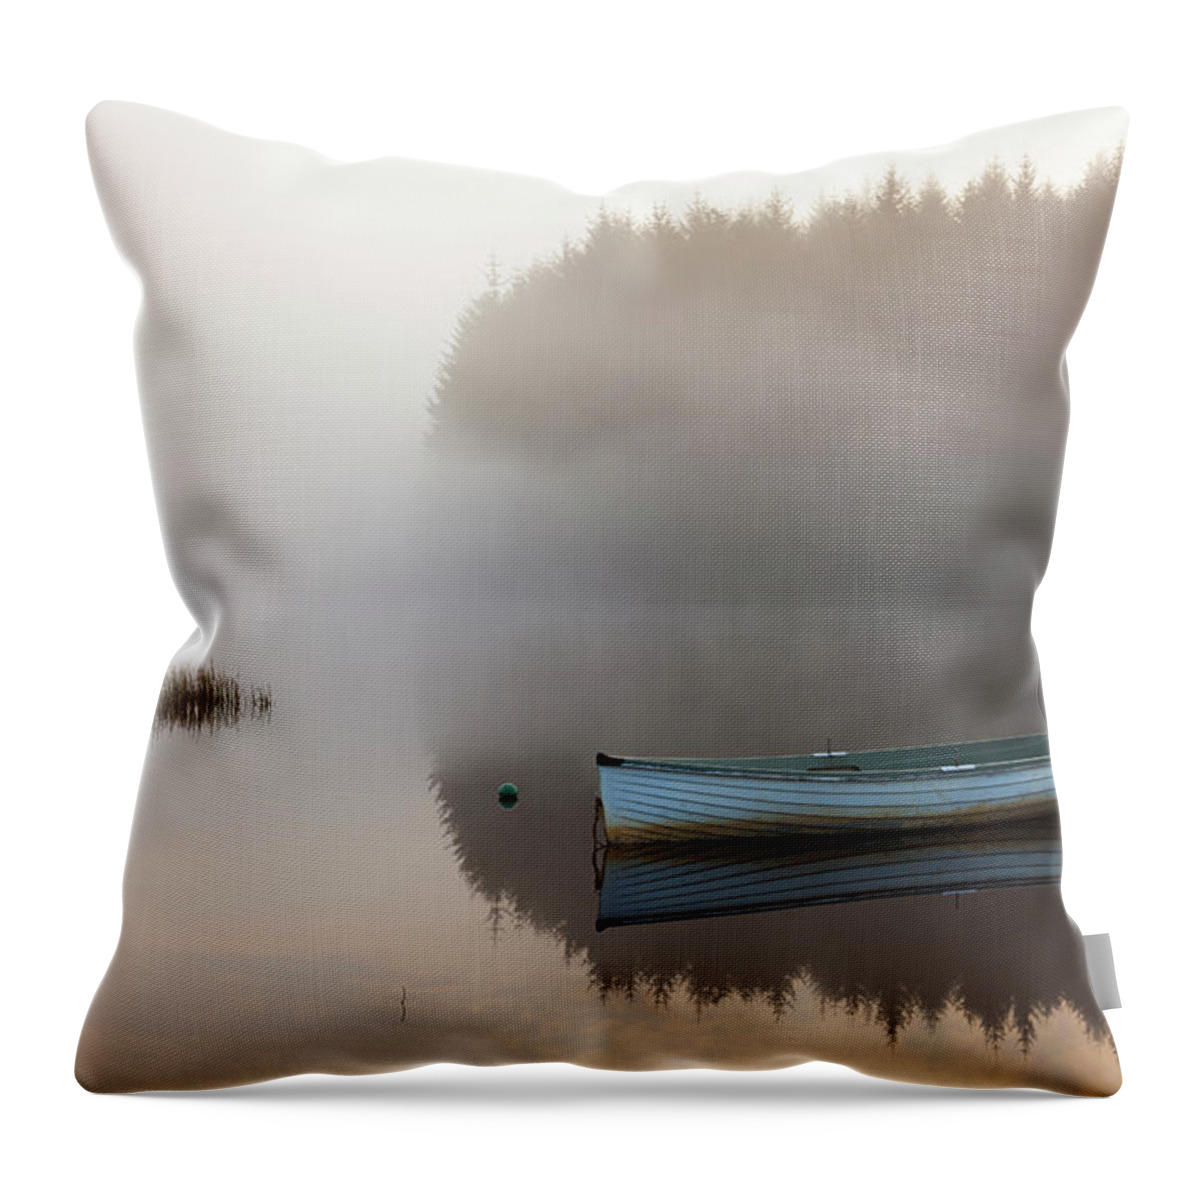 Scenics Throw Pillow featuring the photograph Mist And Reflections On Loch Rusky by Empato